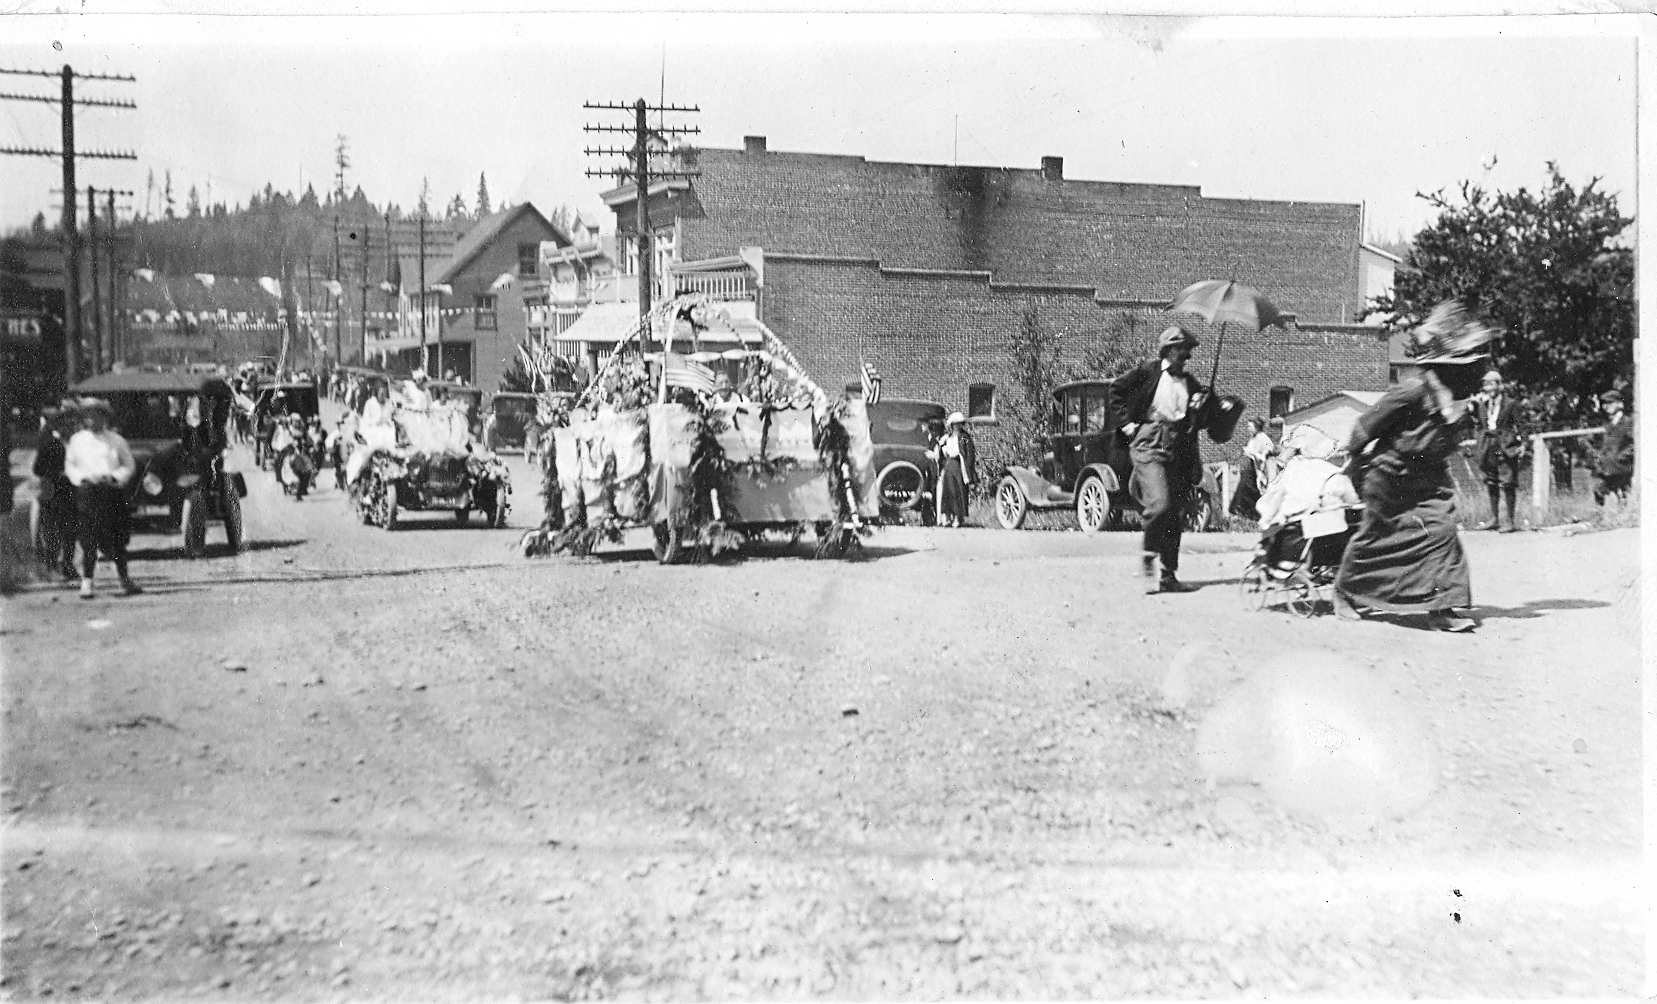 Handwritten note on paper attached to photo states "July Parade - Bothell - 1915." The view is looking west on Main Street. A woman in a hat and pulling a baby carriage is walking in front of the parade, followed by a man with a parasol. A float is at the front of the parade followed by a car carrying women dressed in white, then people marching, other cars, and people on horseback. Dexter's Cafe and Mohn Furniture are in the brick buildings on the right.